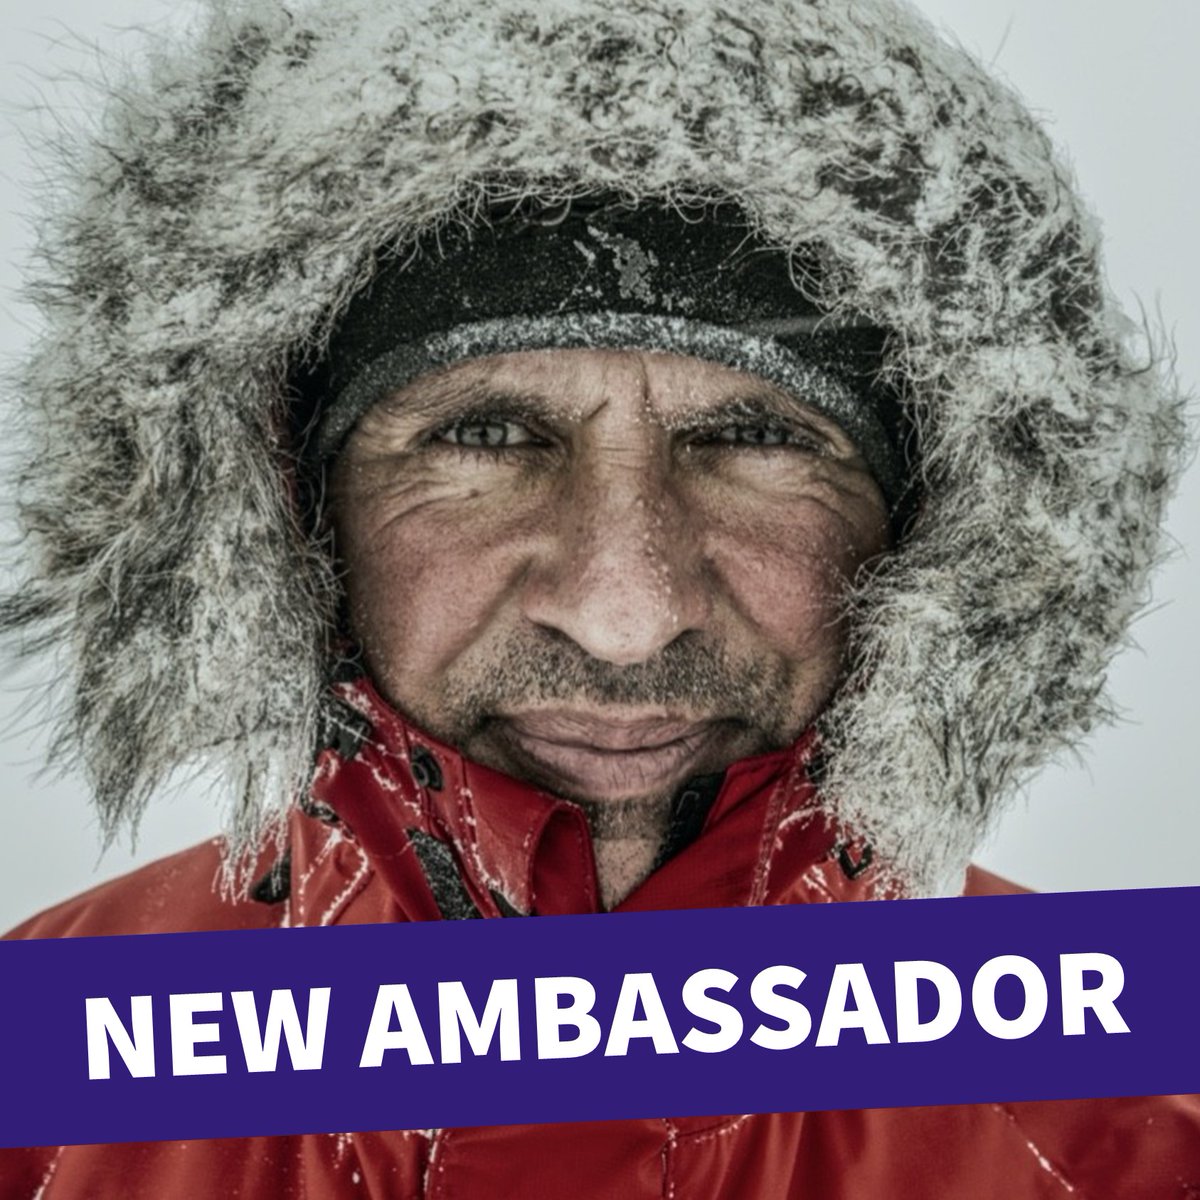 We are delighted to welcome record-breaking polar adventurer Louis Rudd MBE to the @UlyssesTrust as one of our Ambassadors. We are thrilled to have Louis on board. #thankyou Lou ulyssestrust.co.uk/about-us/ambas… #ThankyouTuesday